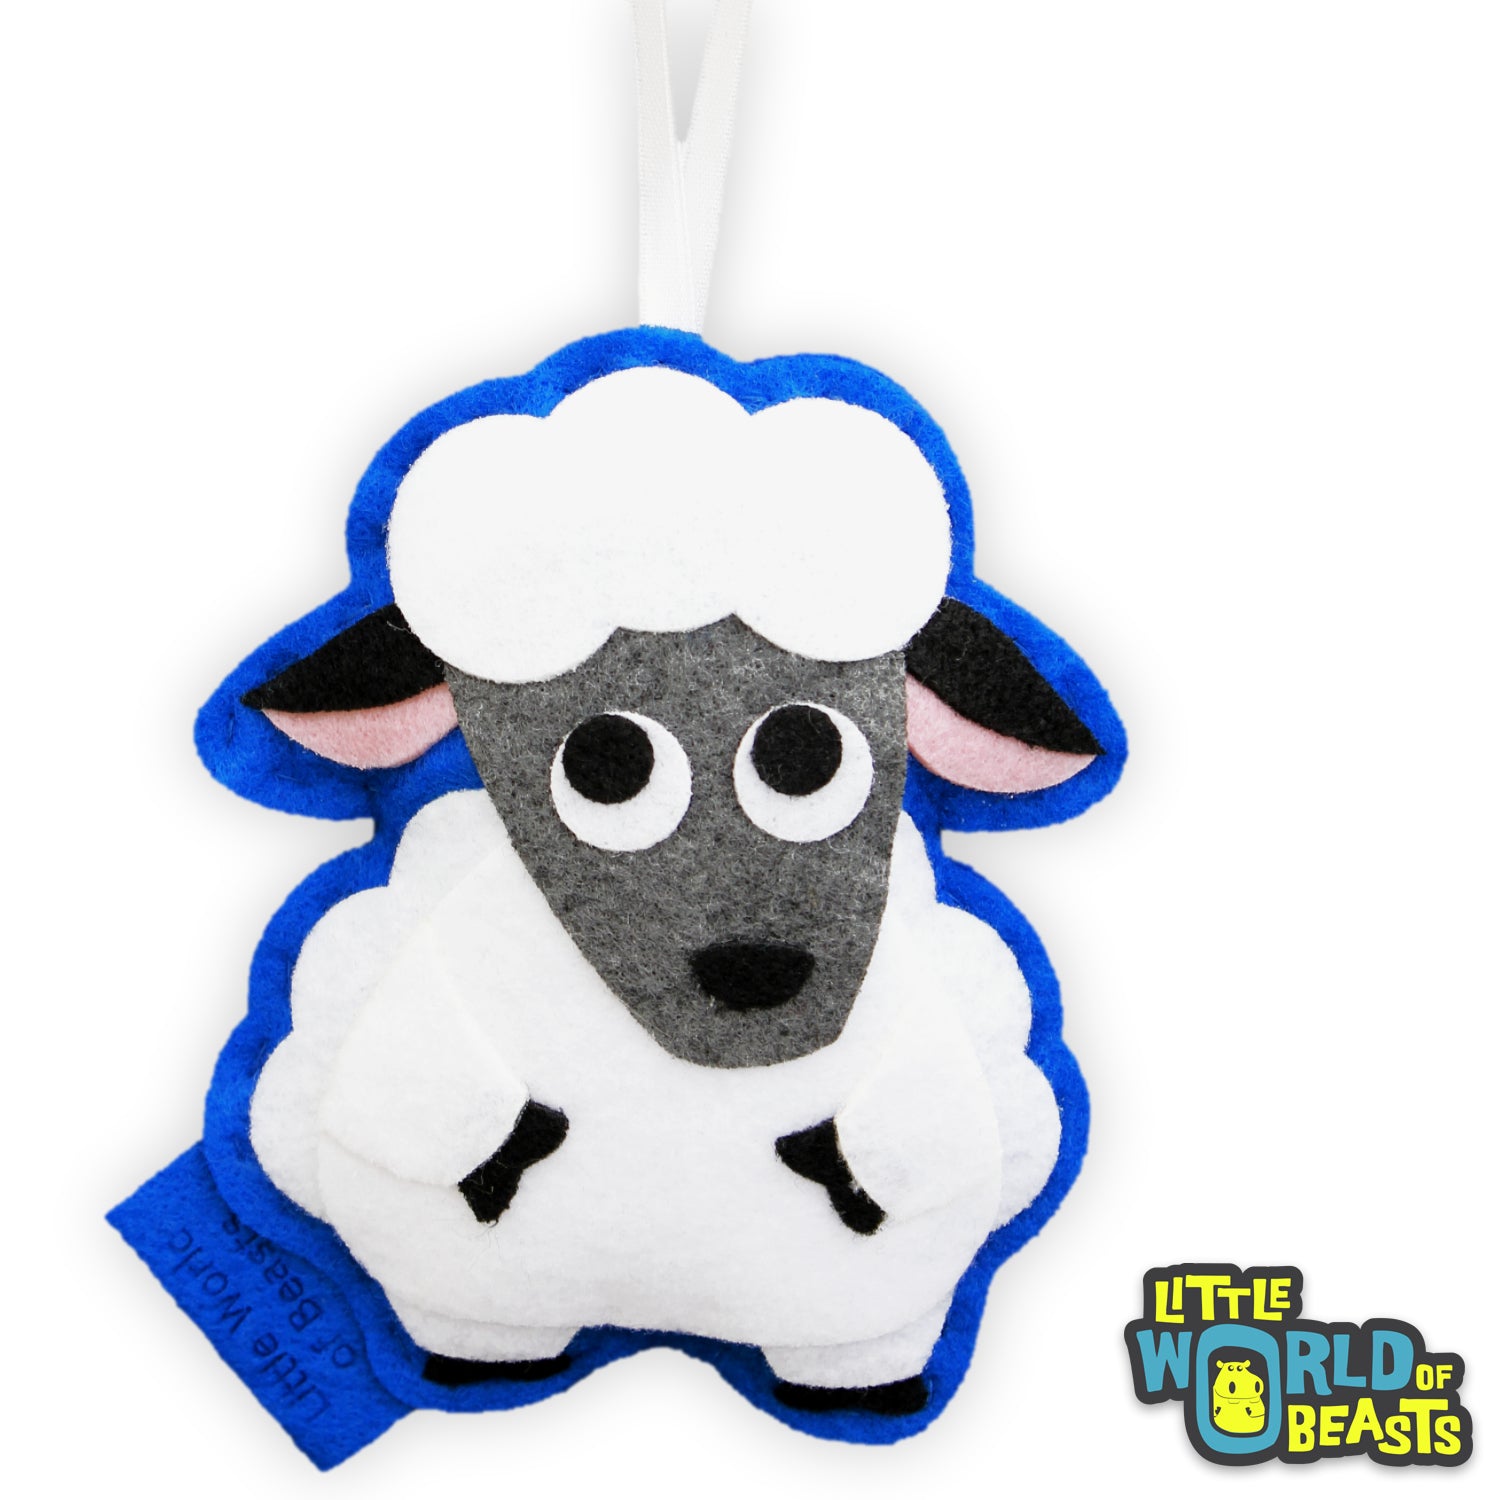 Personalized Sheep Ornament 